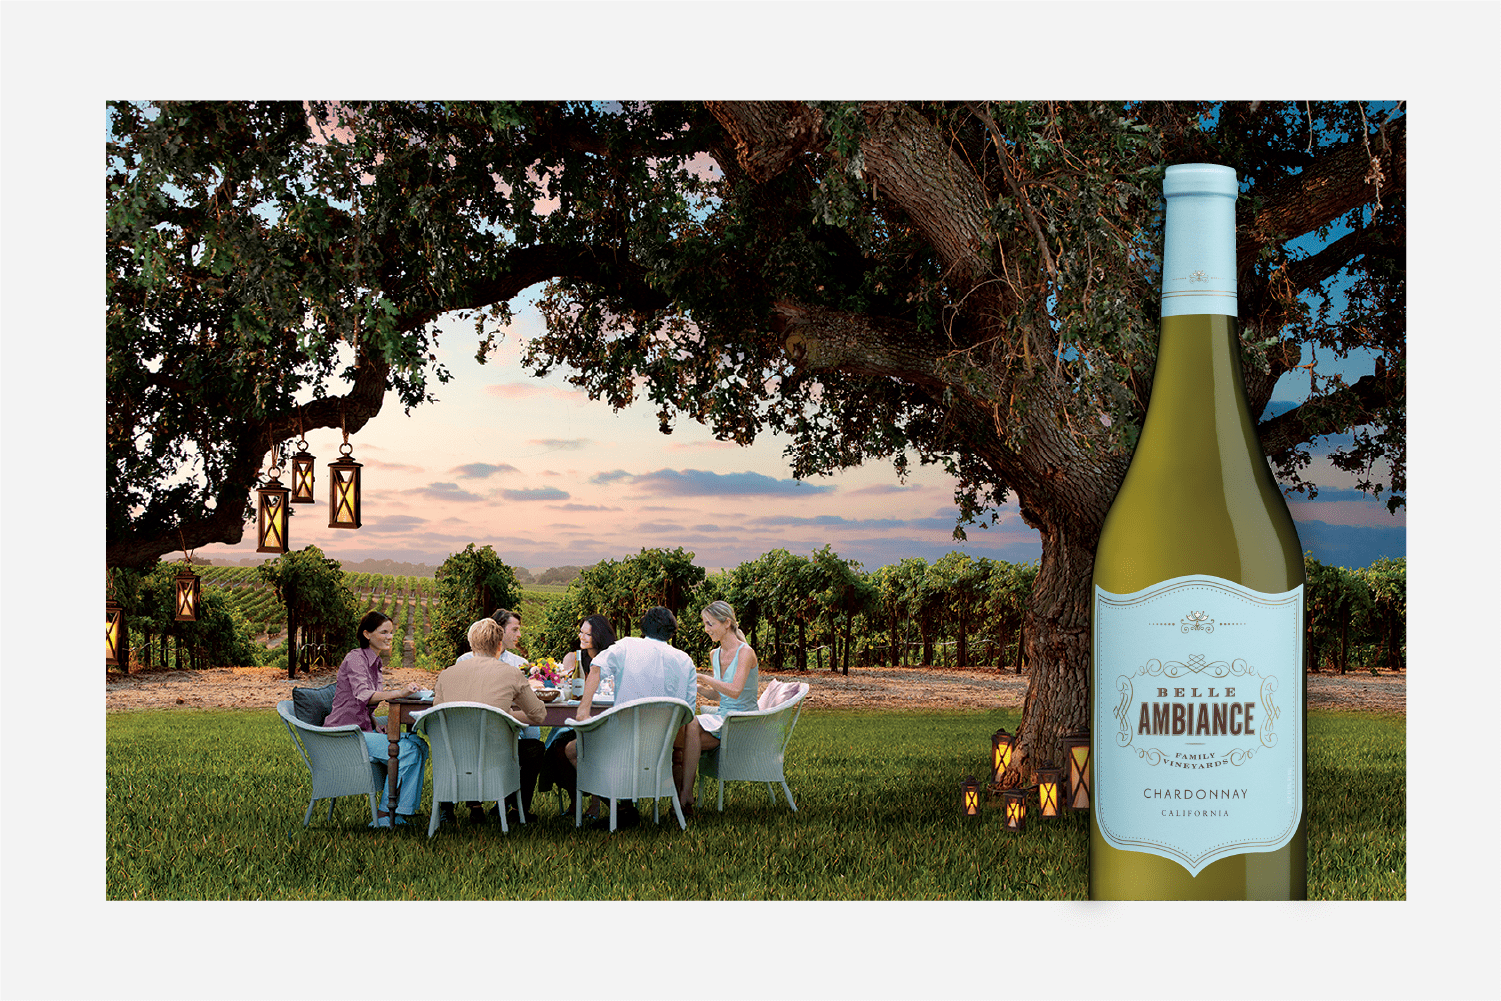 The beautiful vineyard of Belle Ambiance Wines featuring Chardonnay.